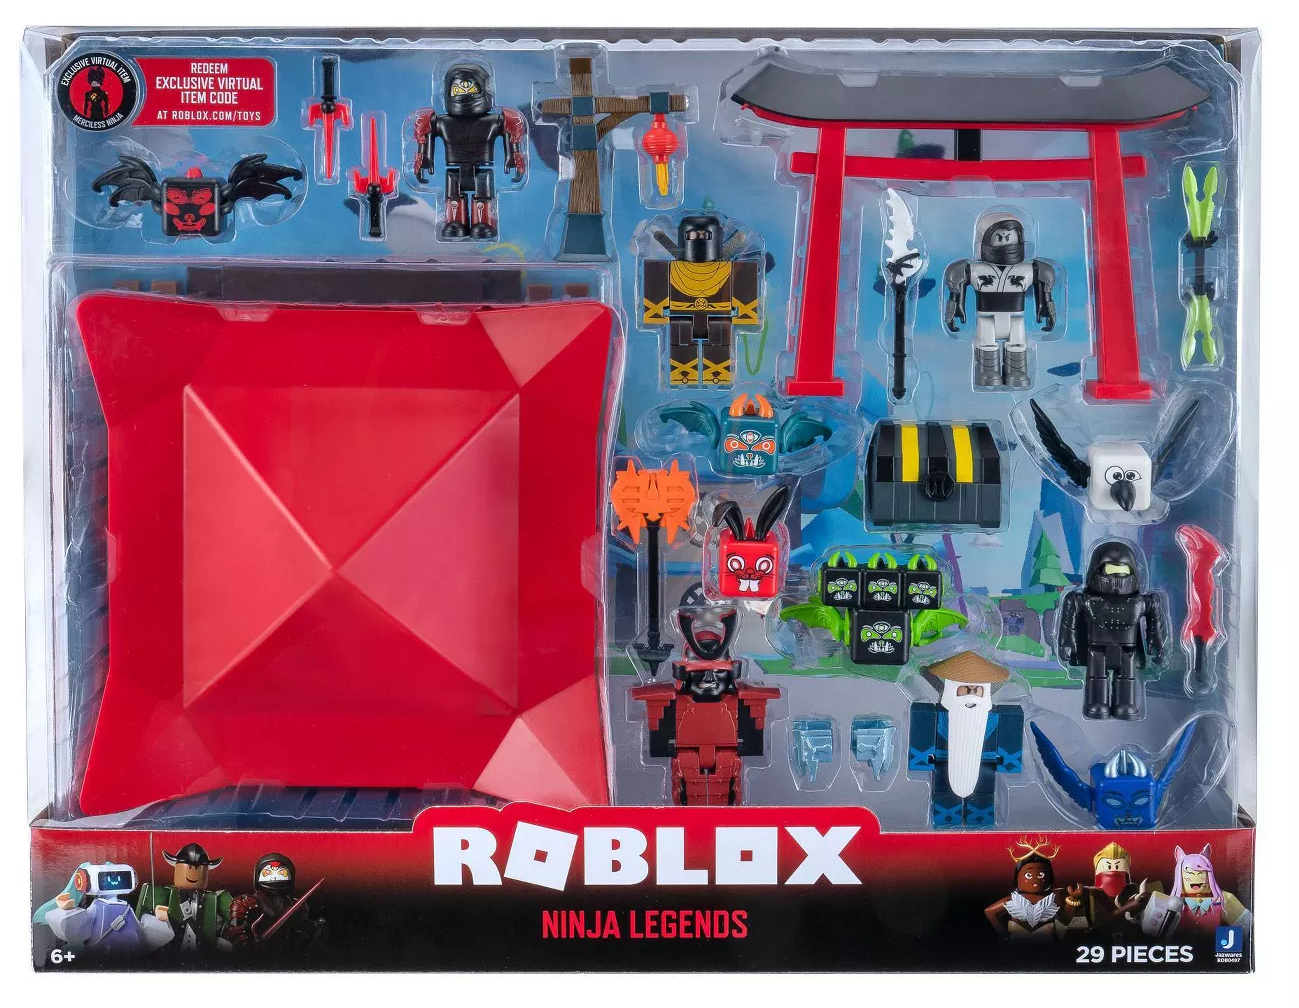 Complete Roblox ninja set and packaging